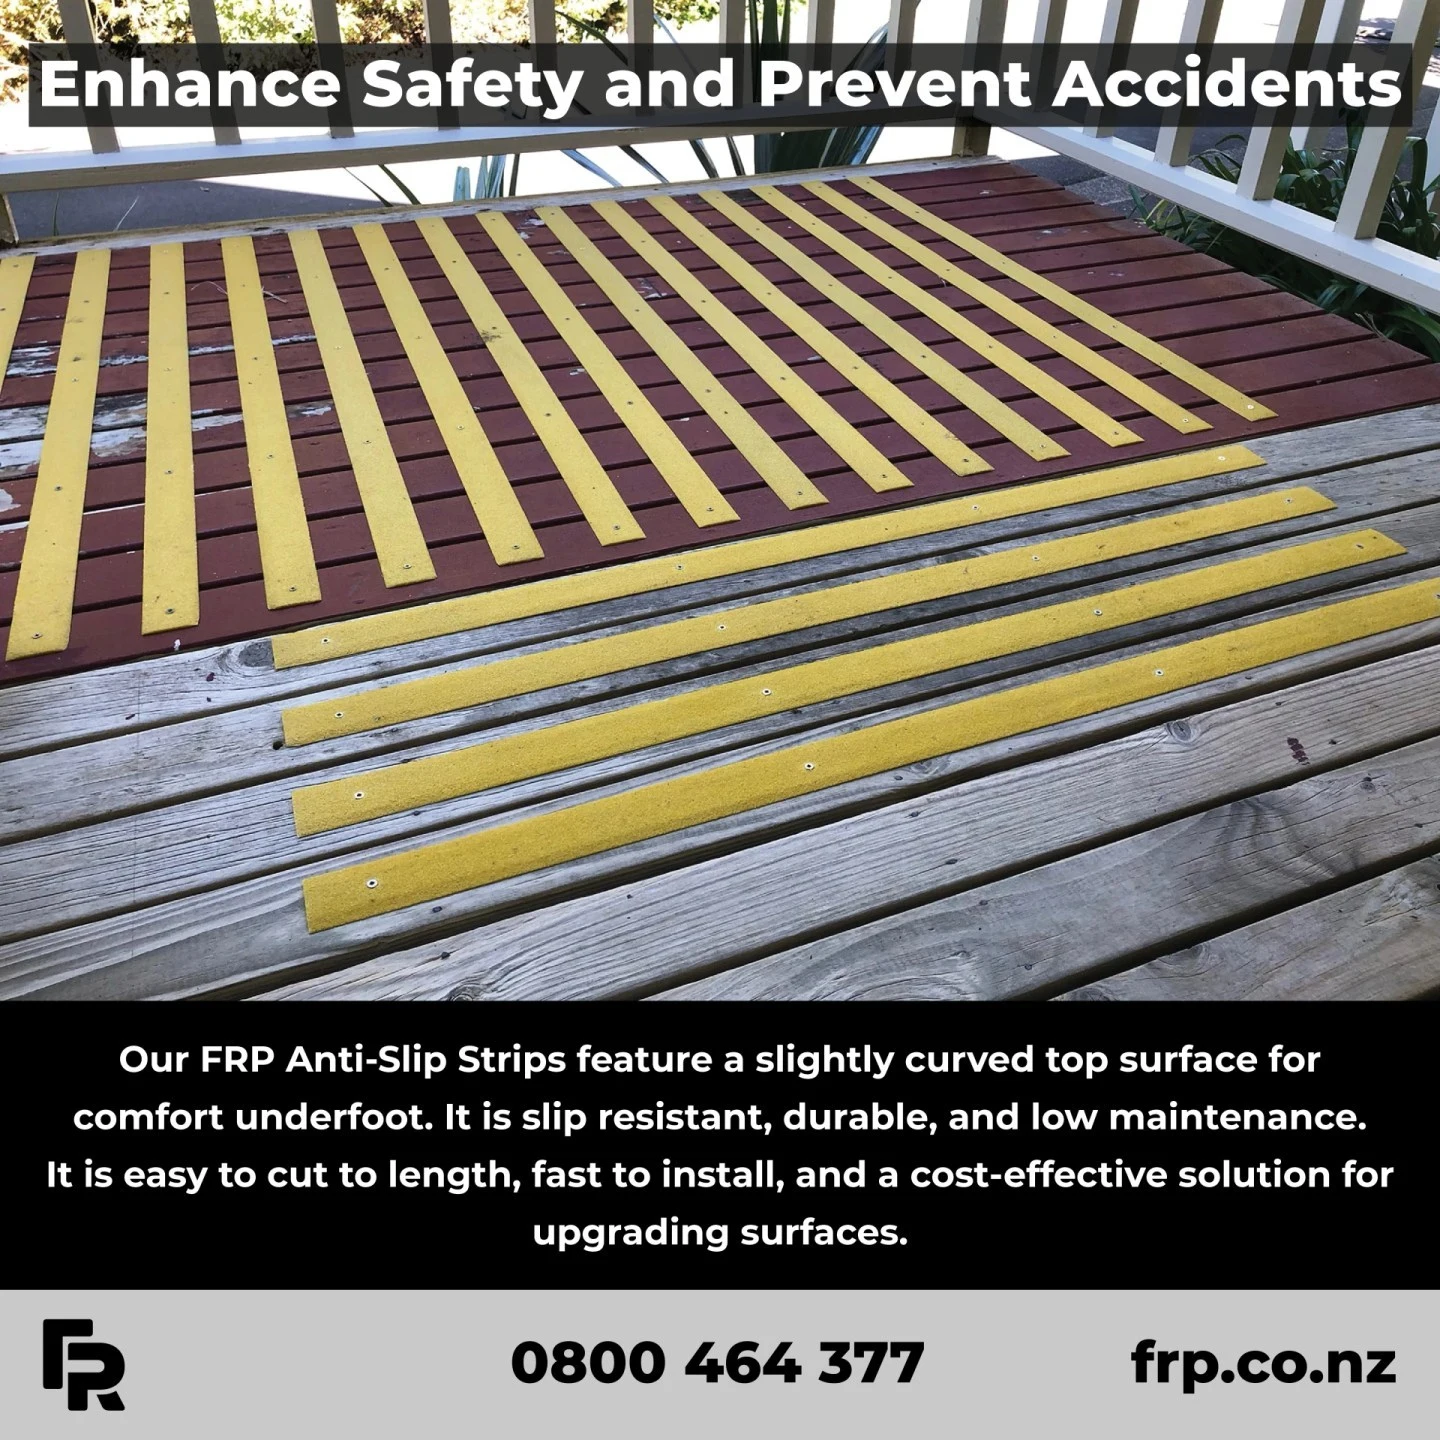 Start planning for winter now!

#frp #frpproducts #antislip #safety #nonslip #walkways #commercial #industrial #residential #nzarchitects